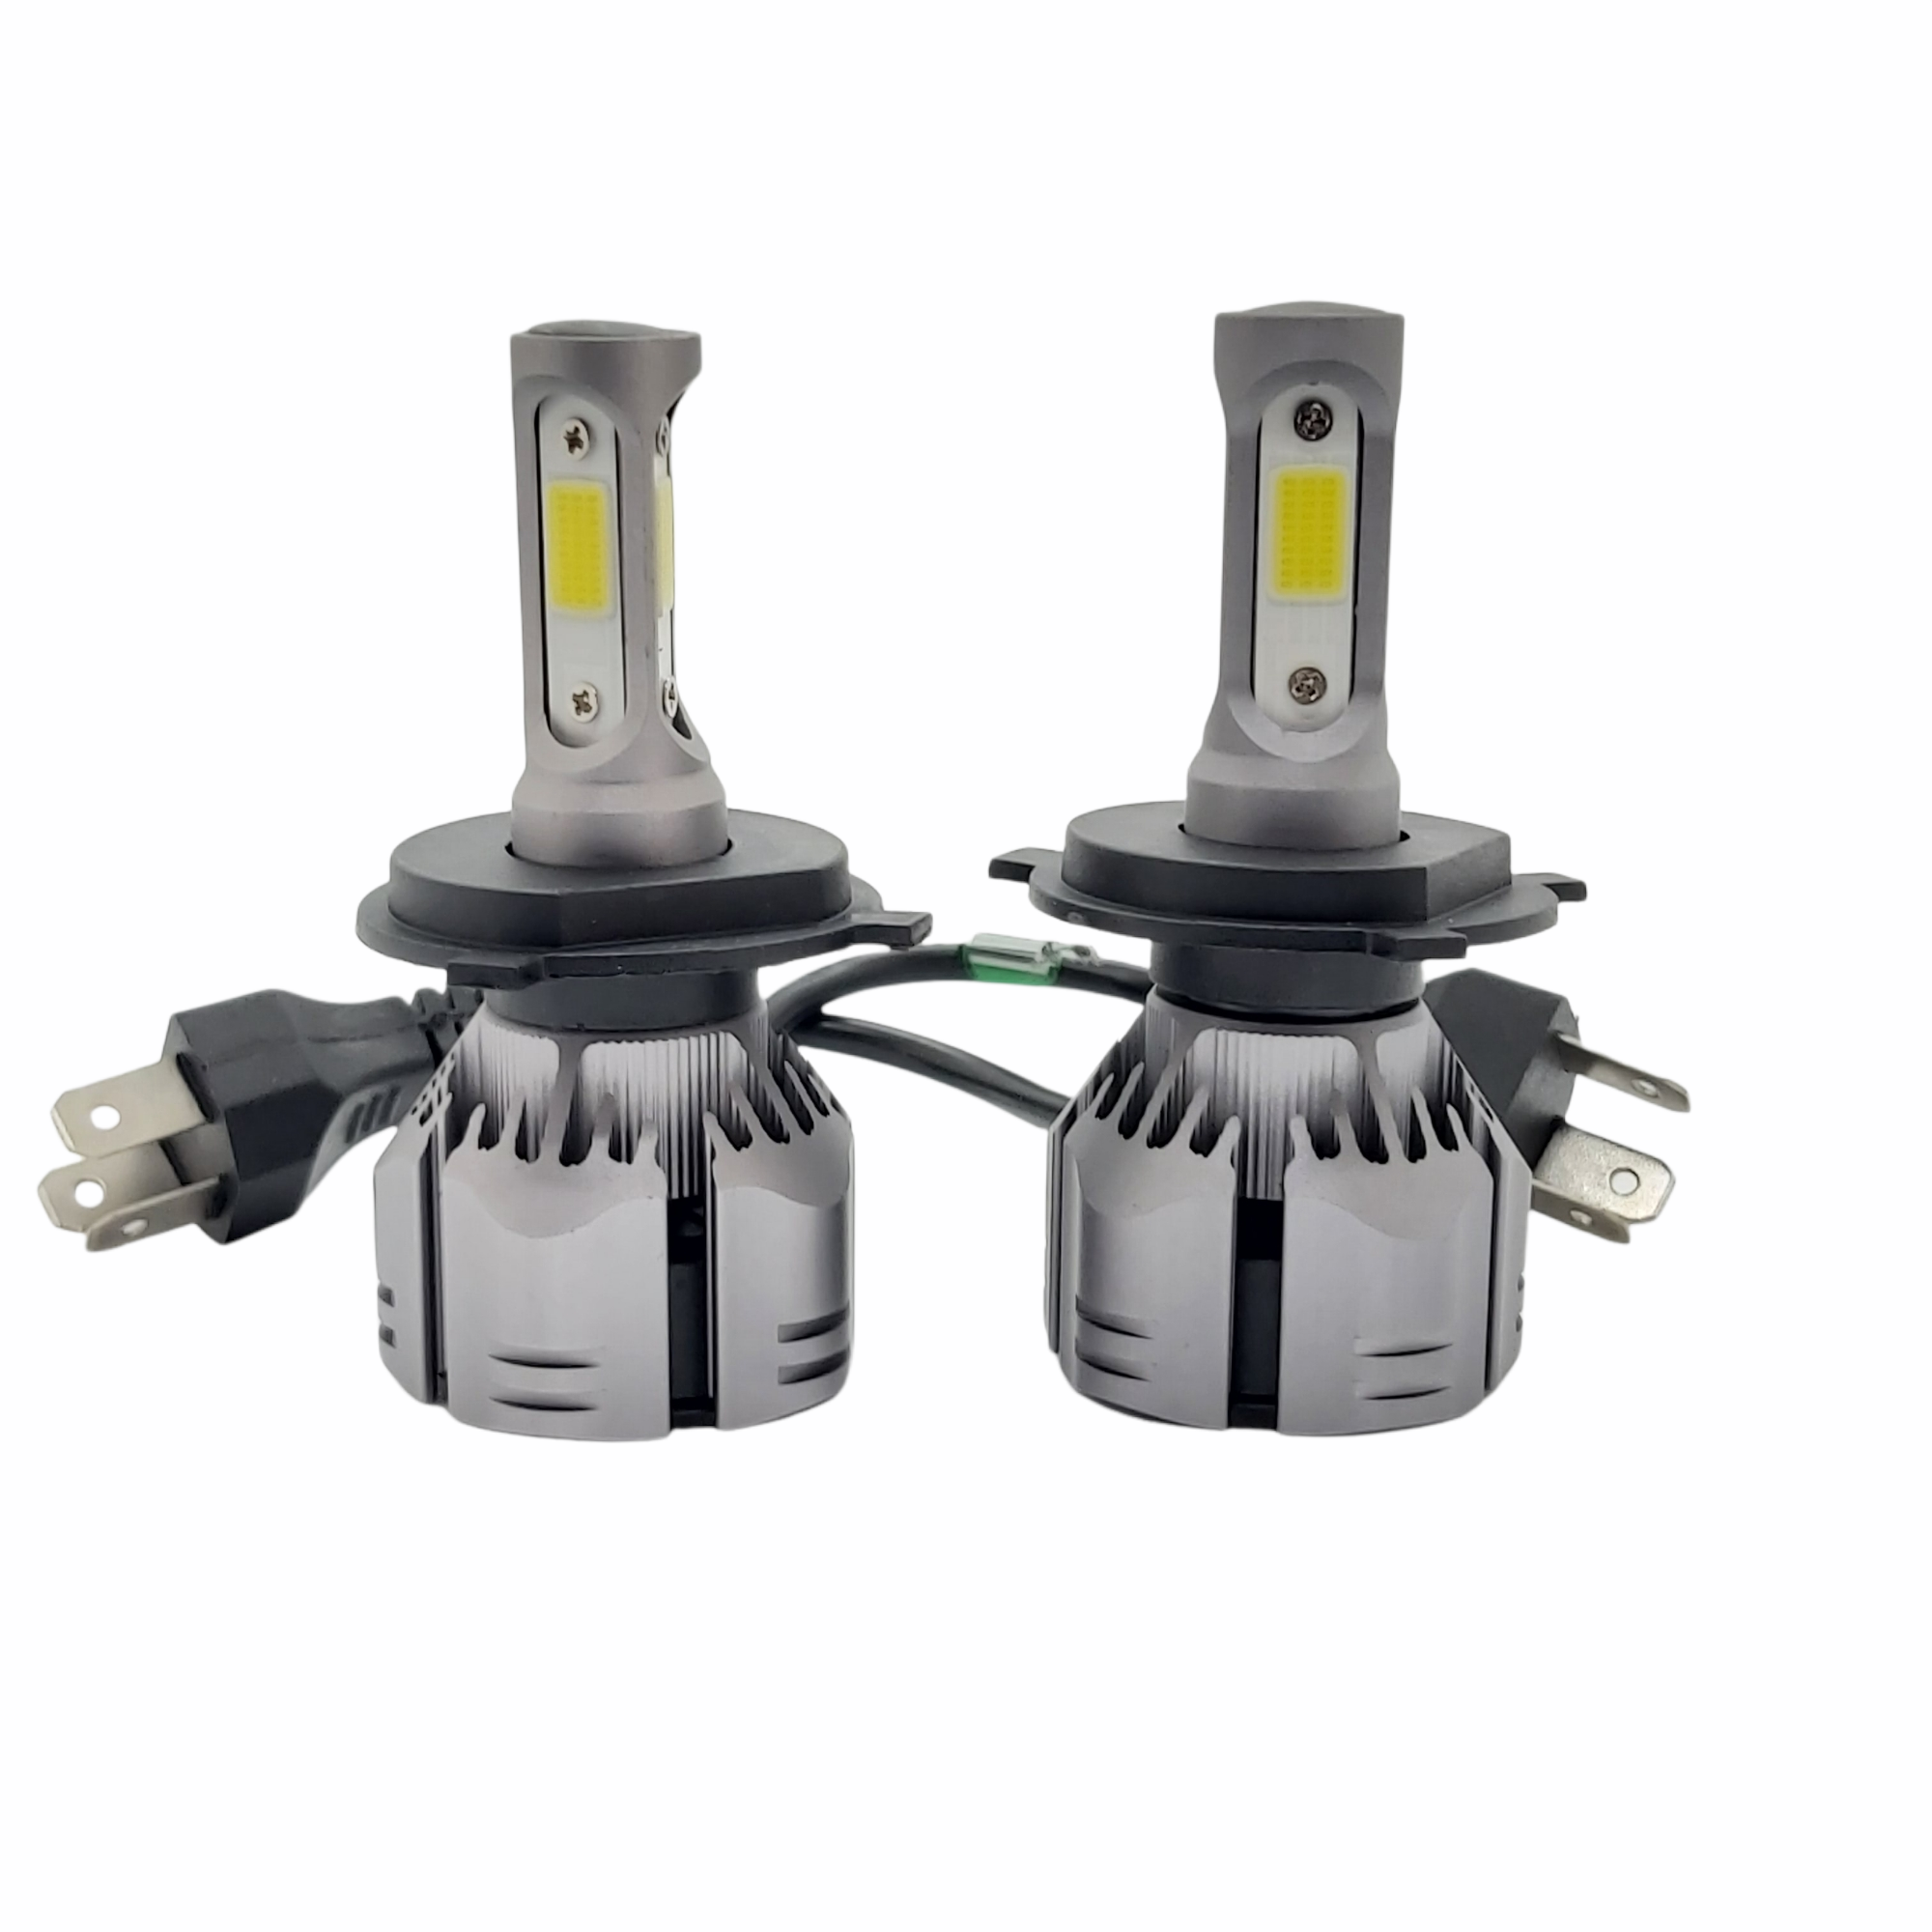 OPPULITE H4 Led Bombillas Faros para Coches，12000LM 70W Luces Led